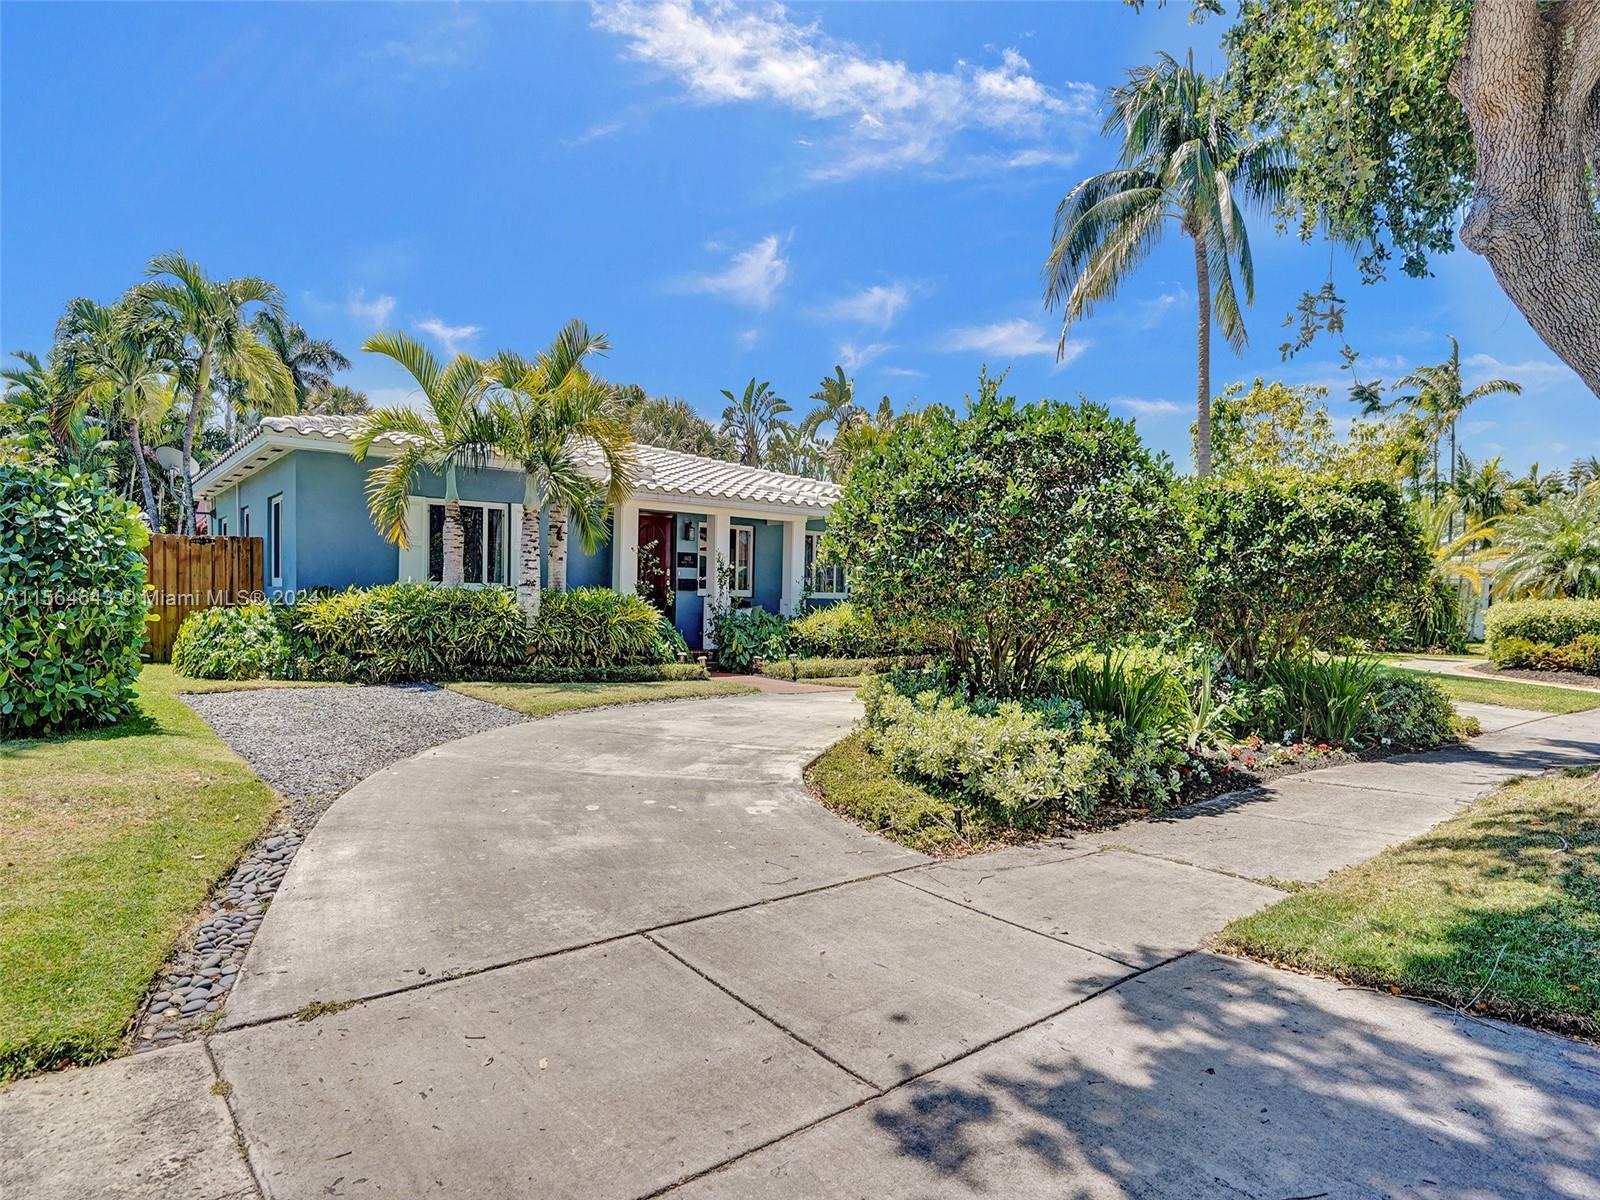 Photo of 1408 Monroe St in Hollywood, FL